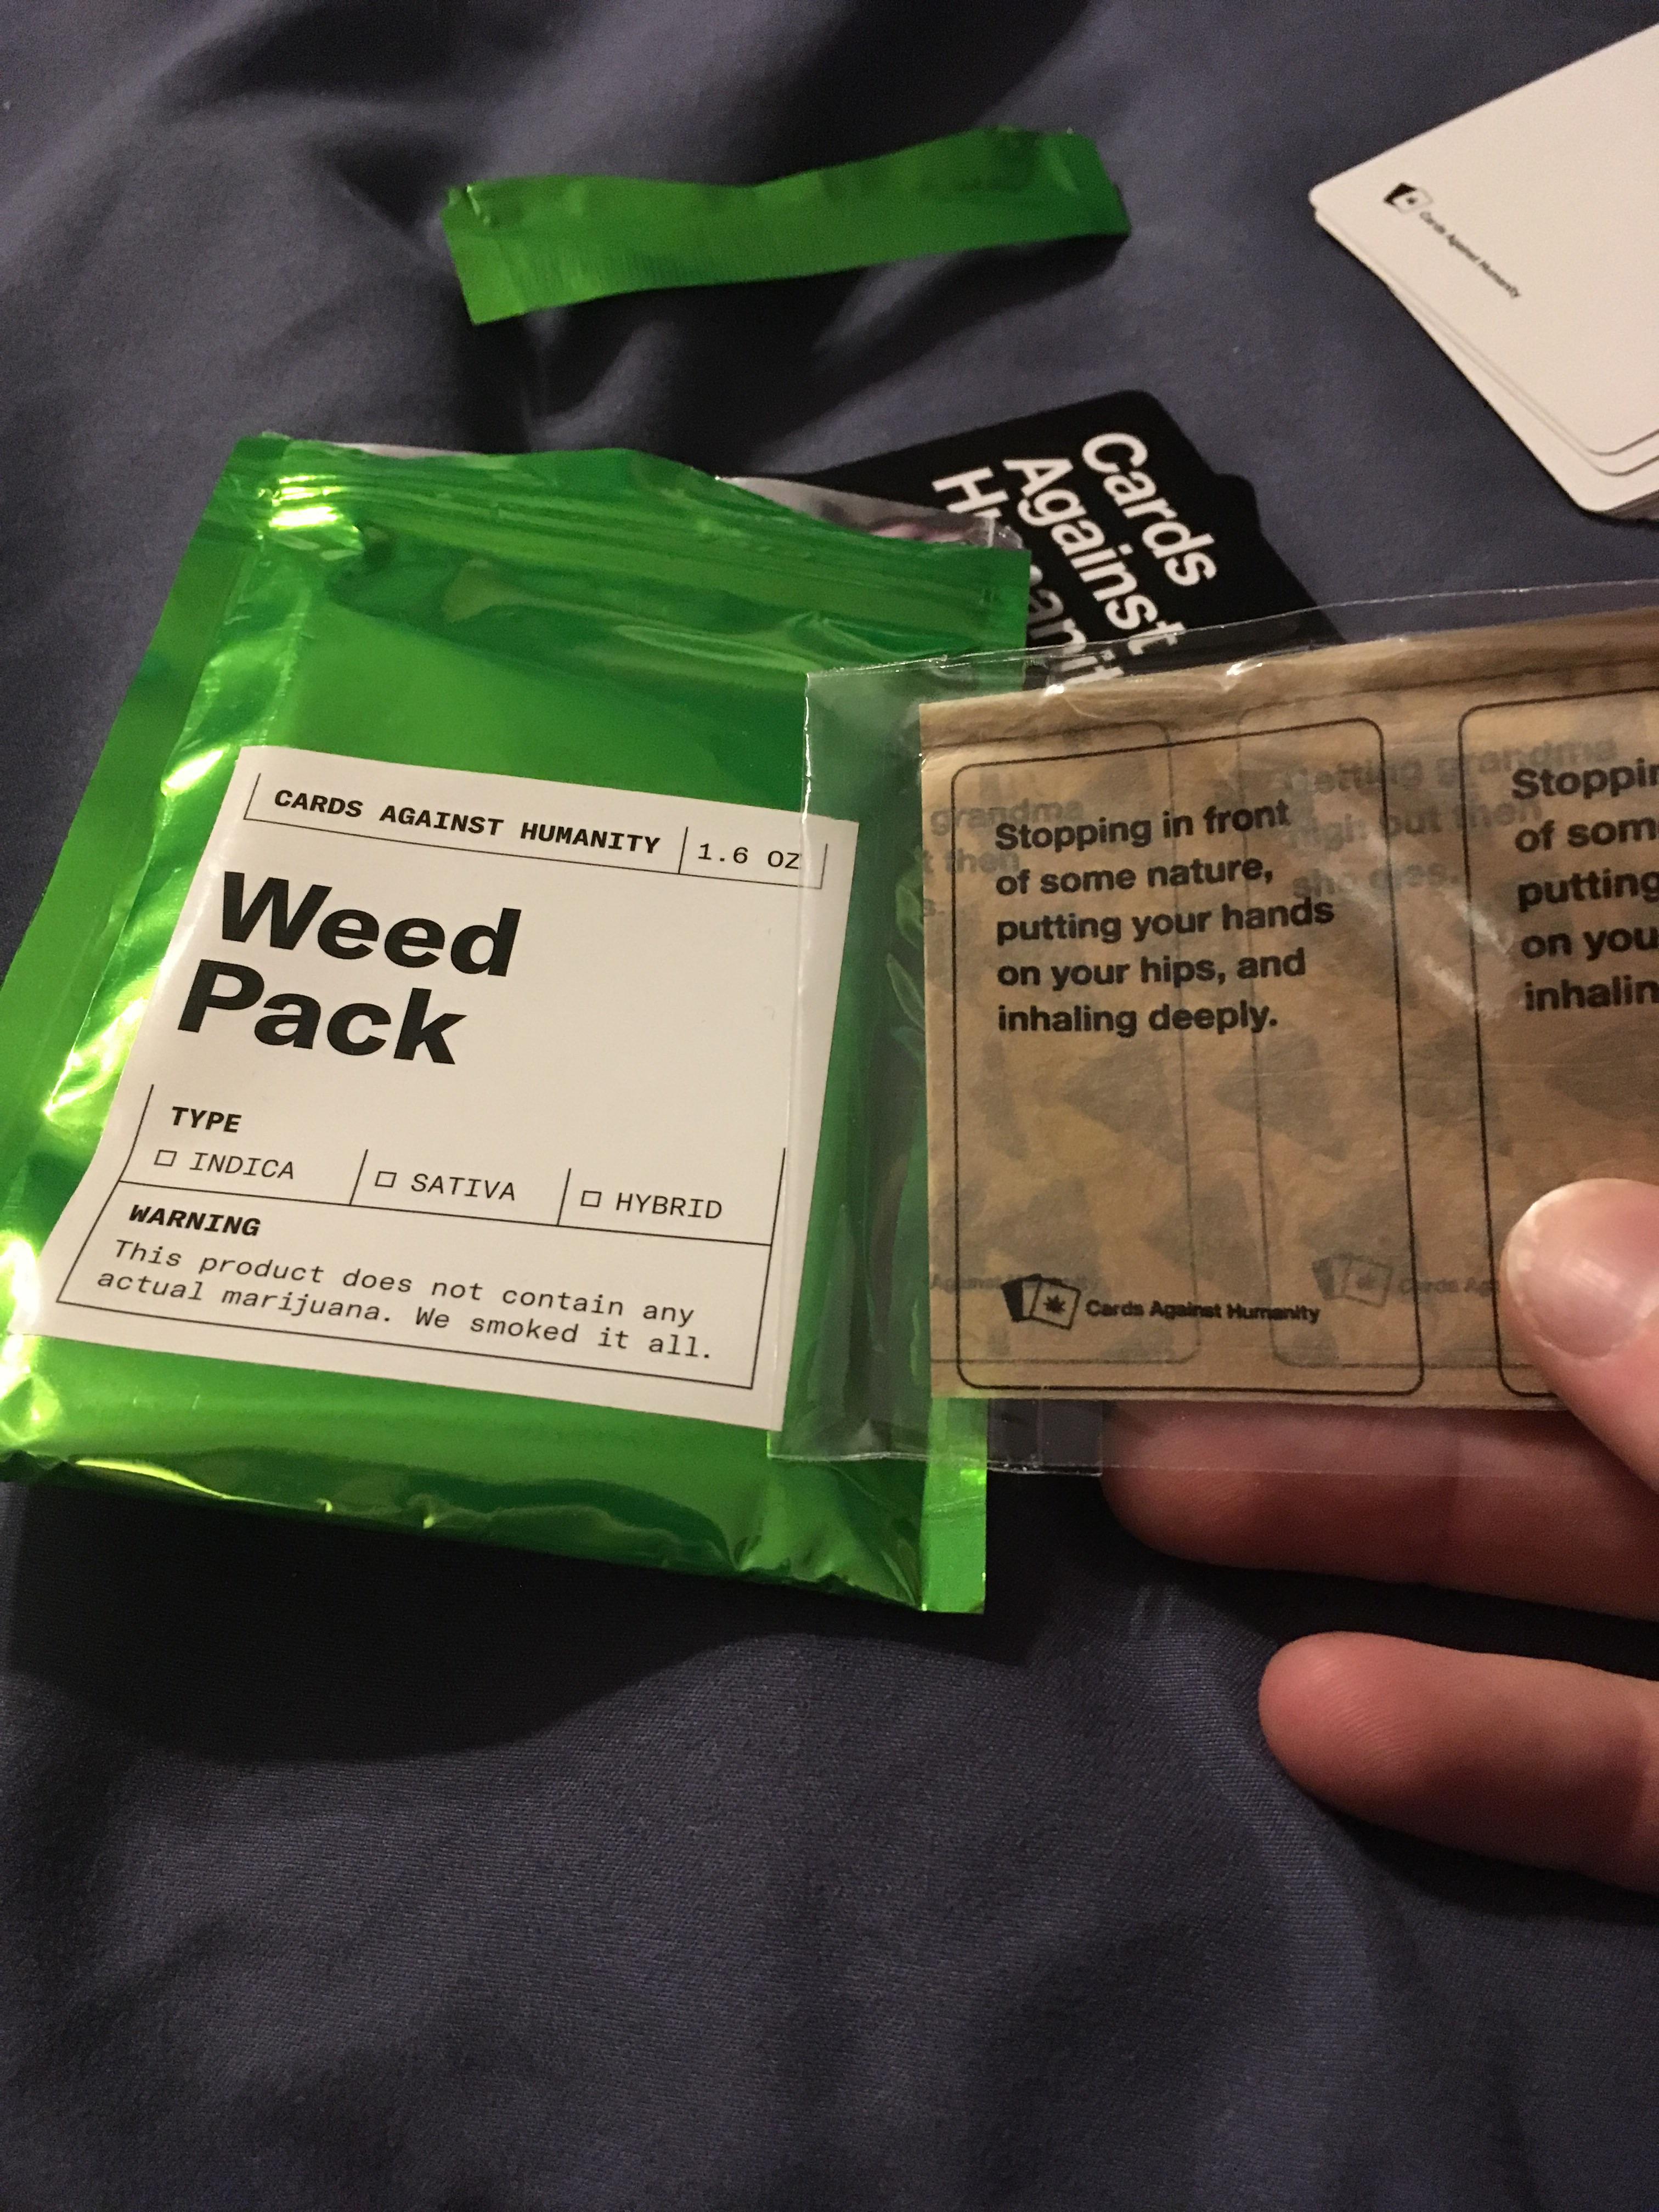 Cards Against Humanity- Weed Pack